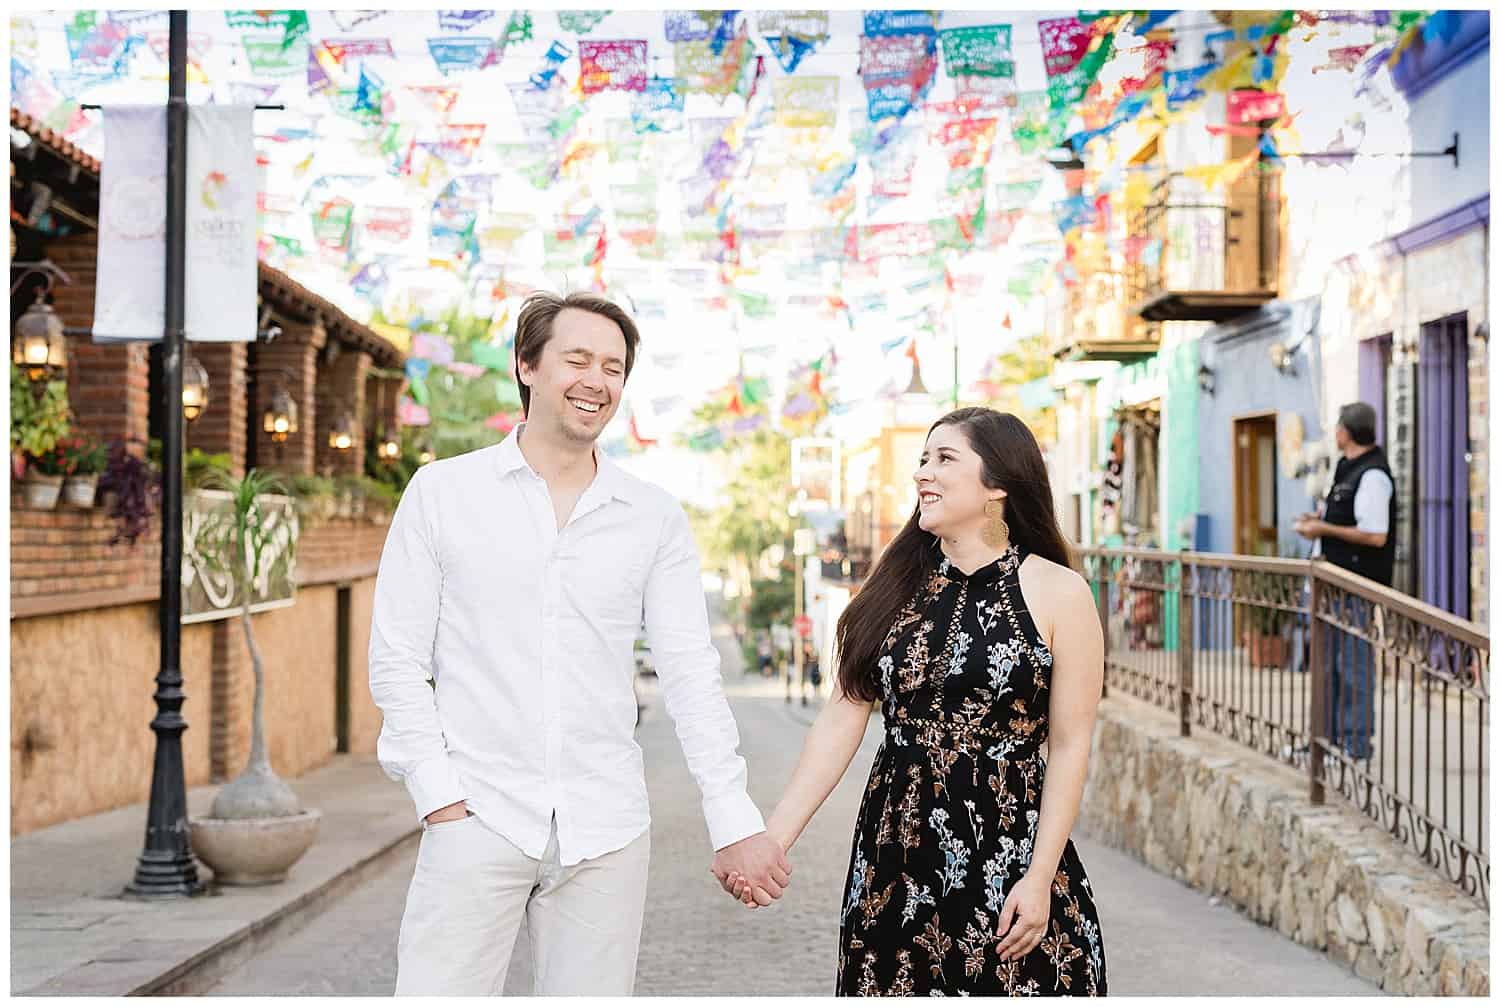 Engagement photo shoot in Cabo by Sara Richardson